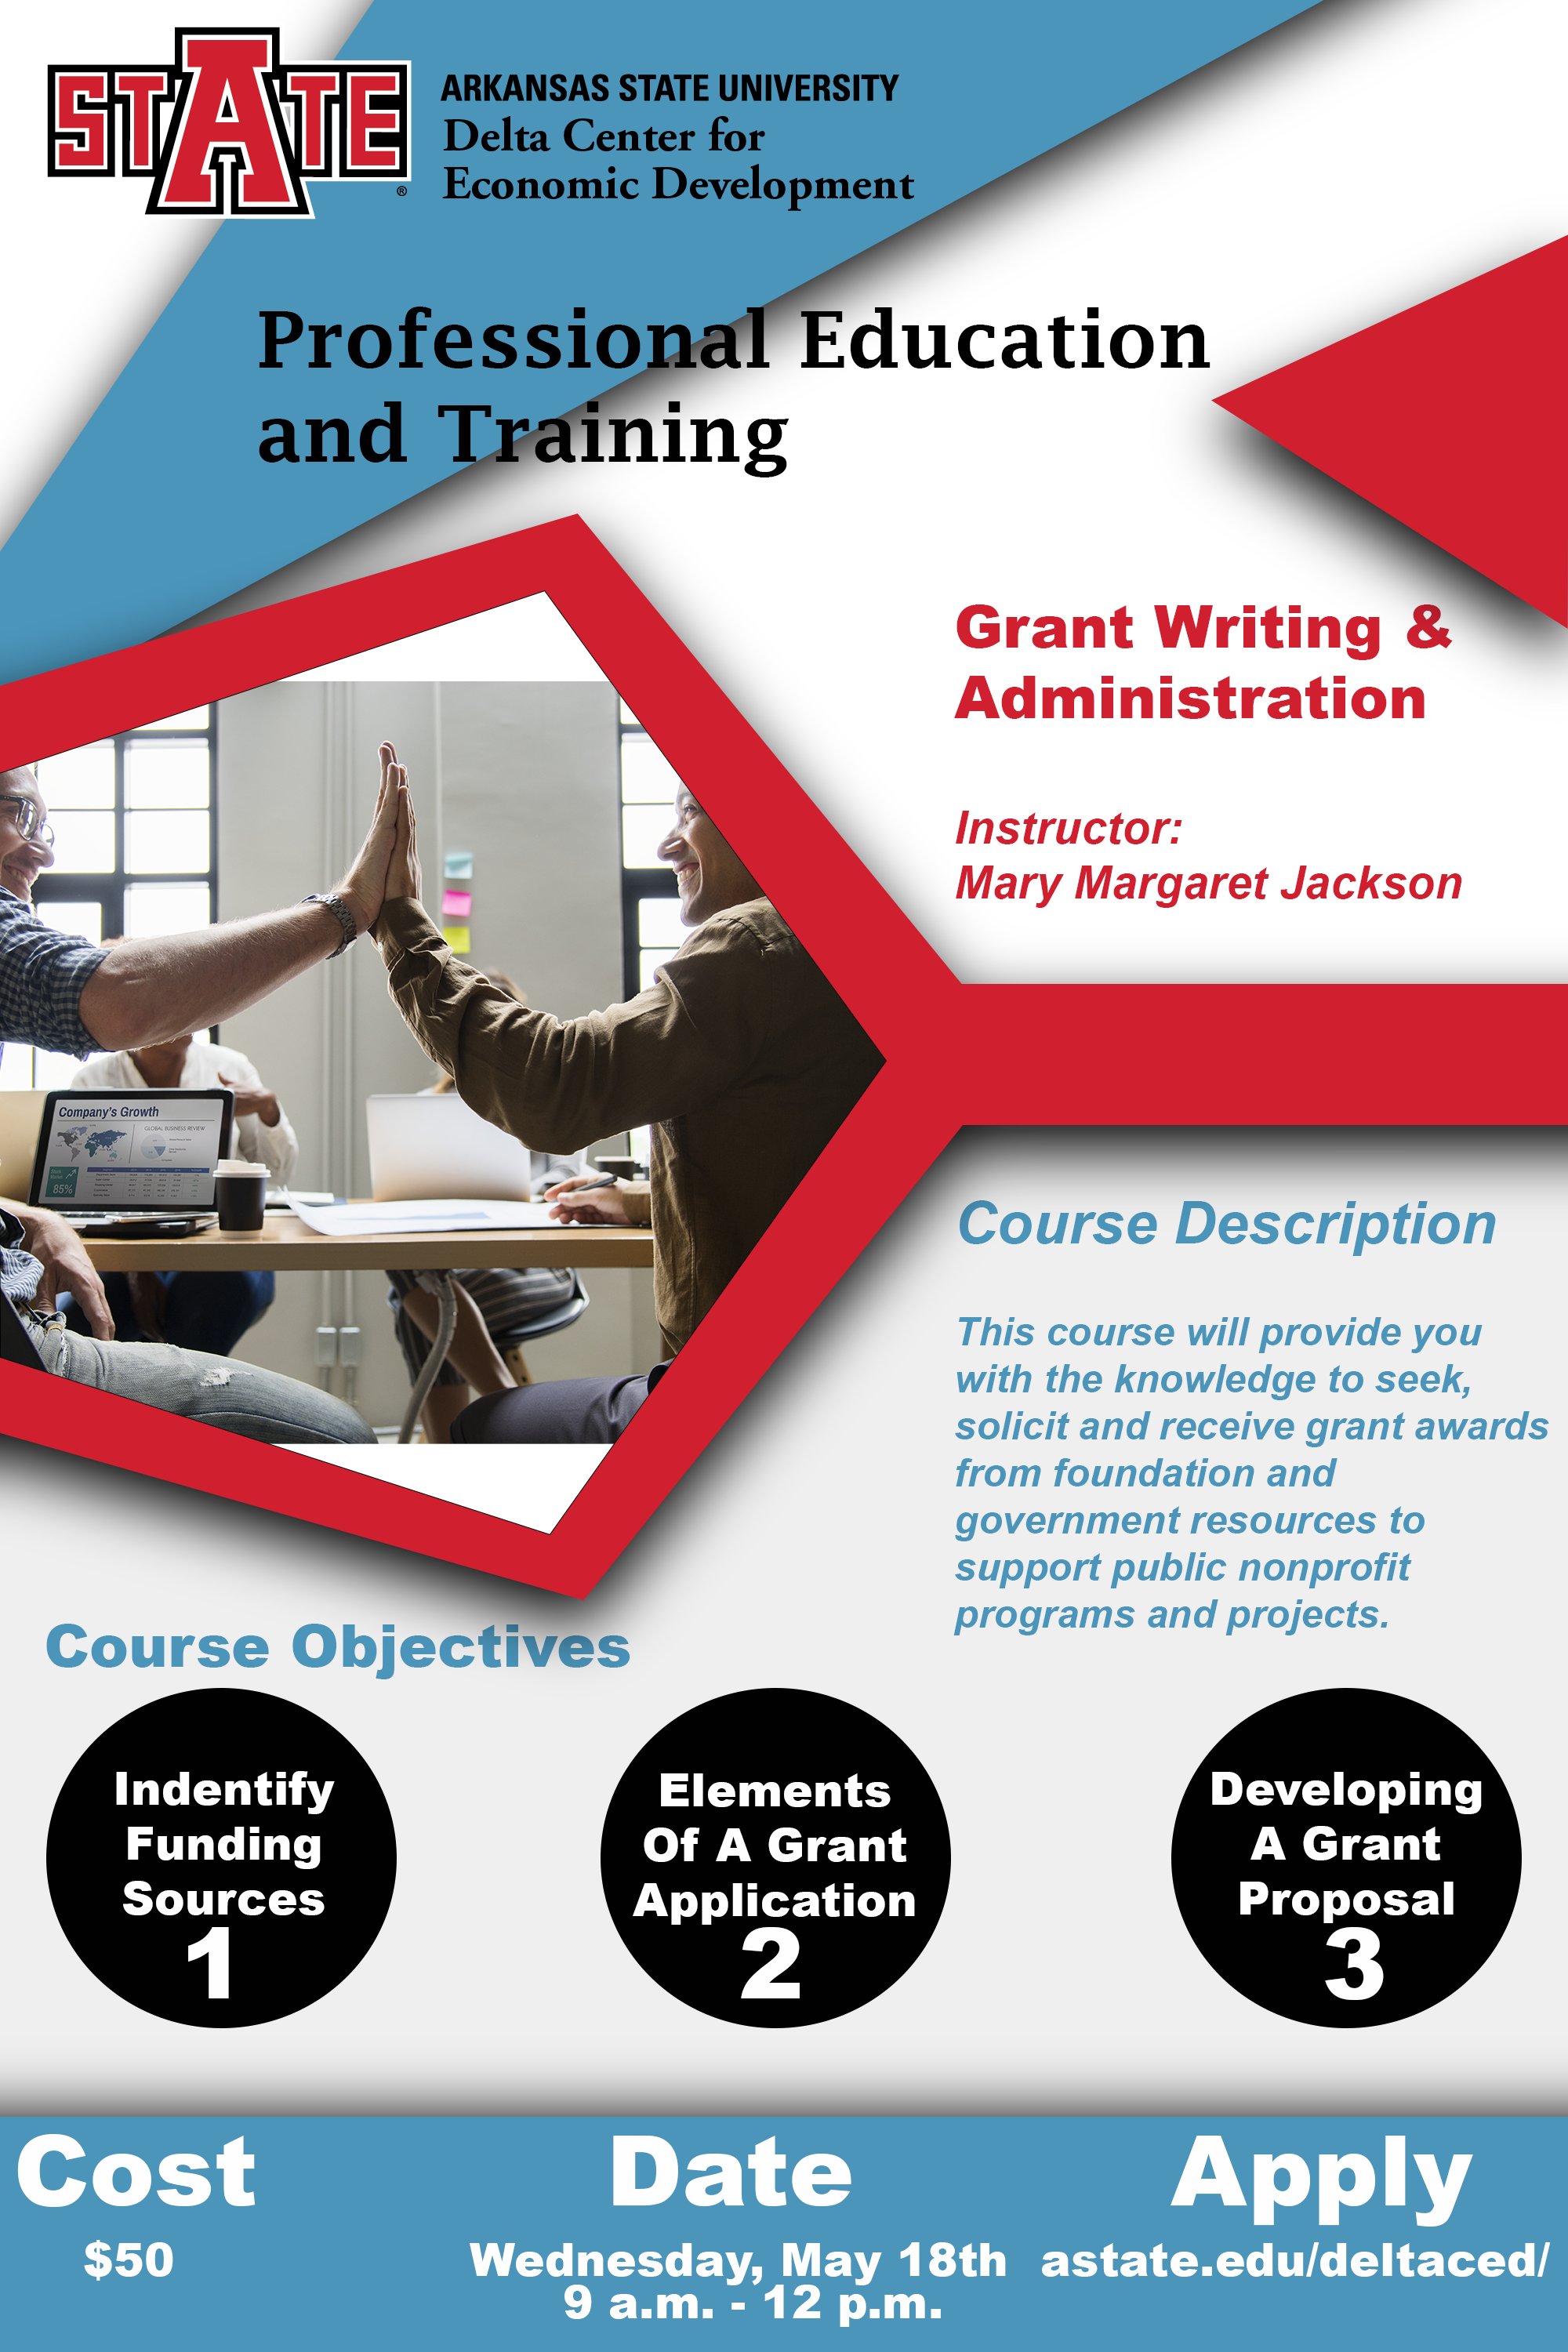 This Delta Center for Economic Development course, taught on May 18 at 9 a.m. by Mary Margaret Jackson, is designed to provide the knowledge to seek, solicit and receive grant awards from foundation and government resources.